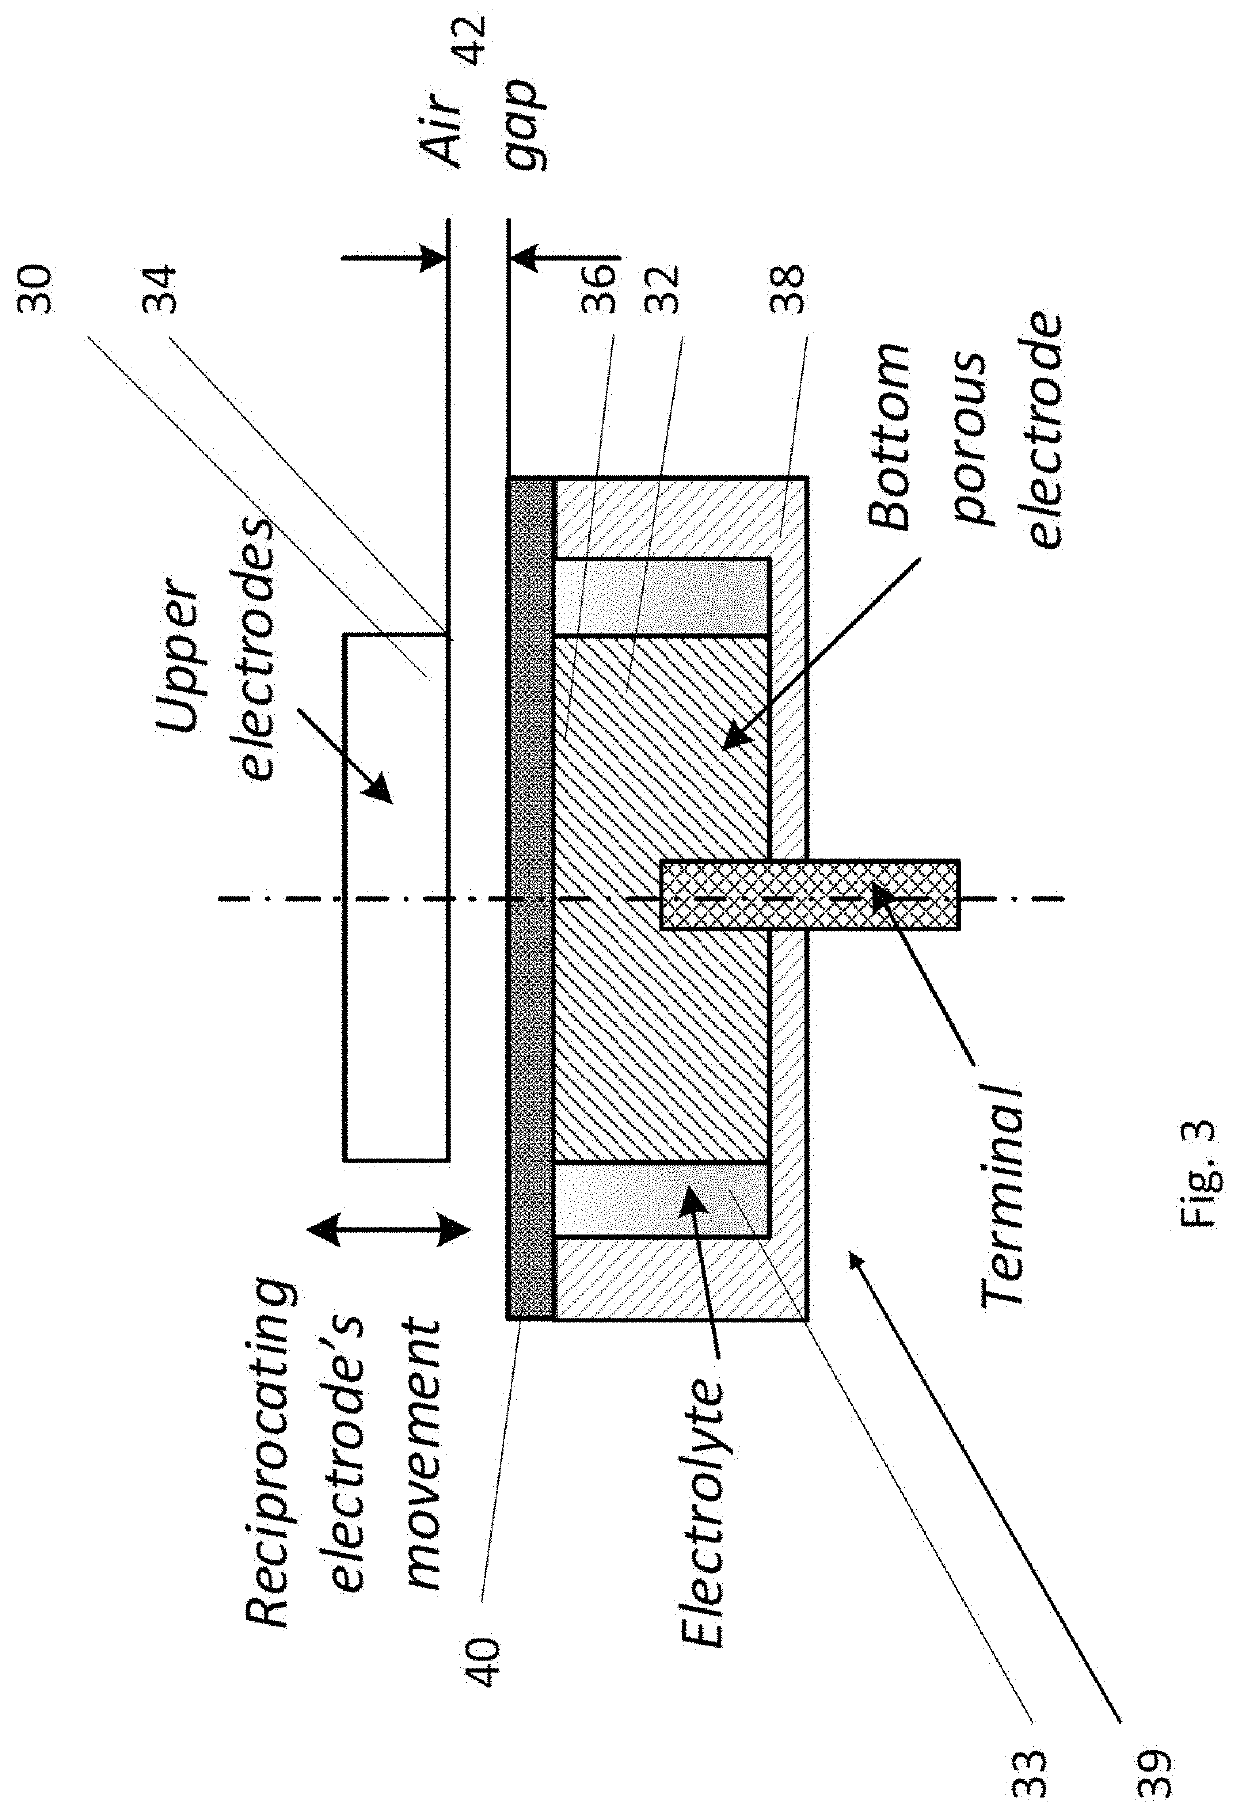 Electrostatic energy generator using a parallel plate capacitor